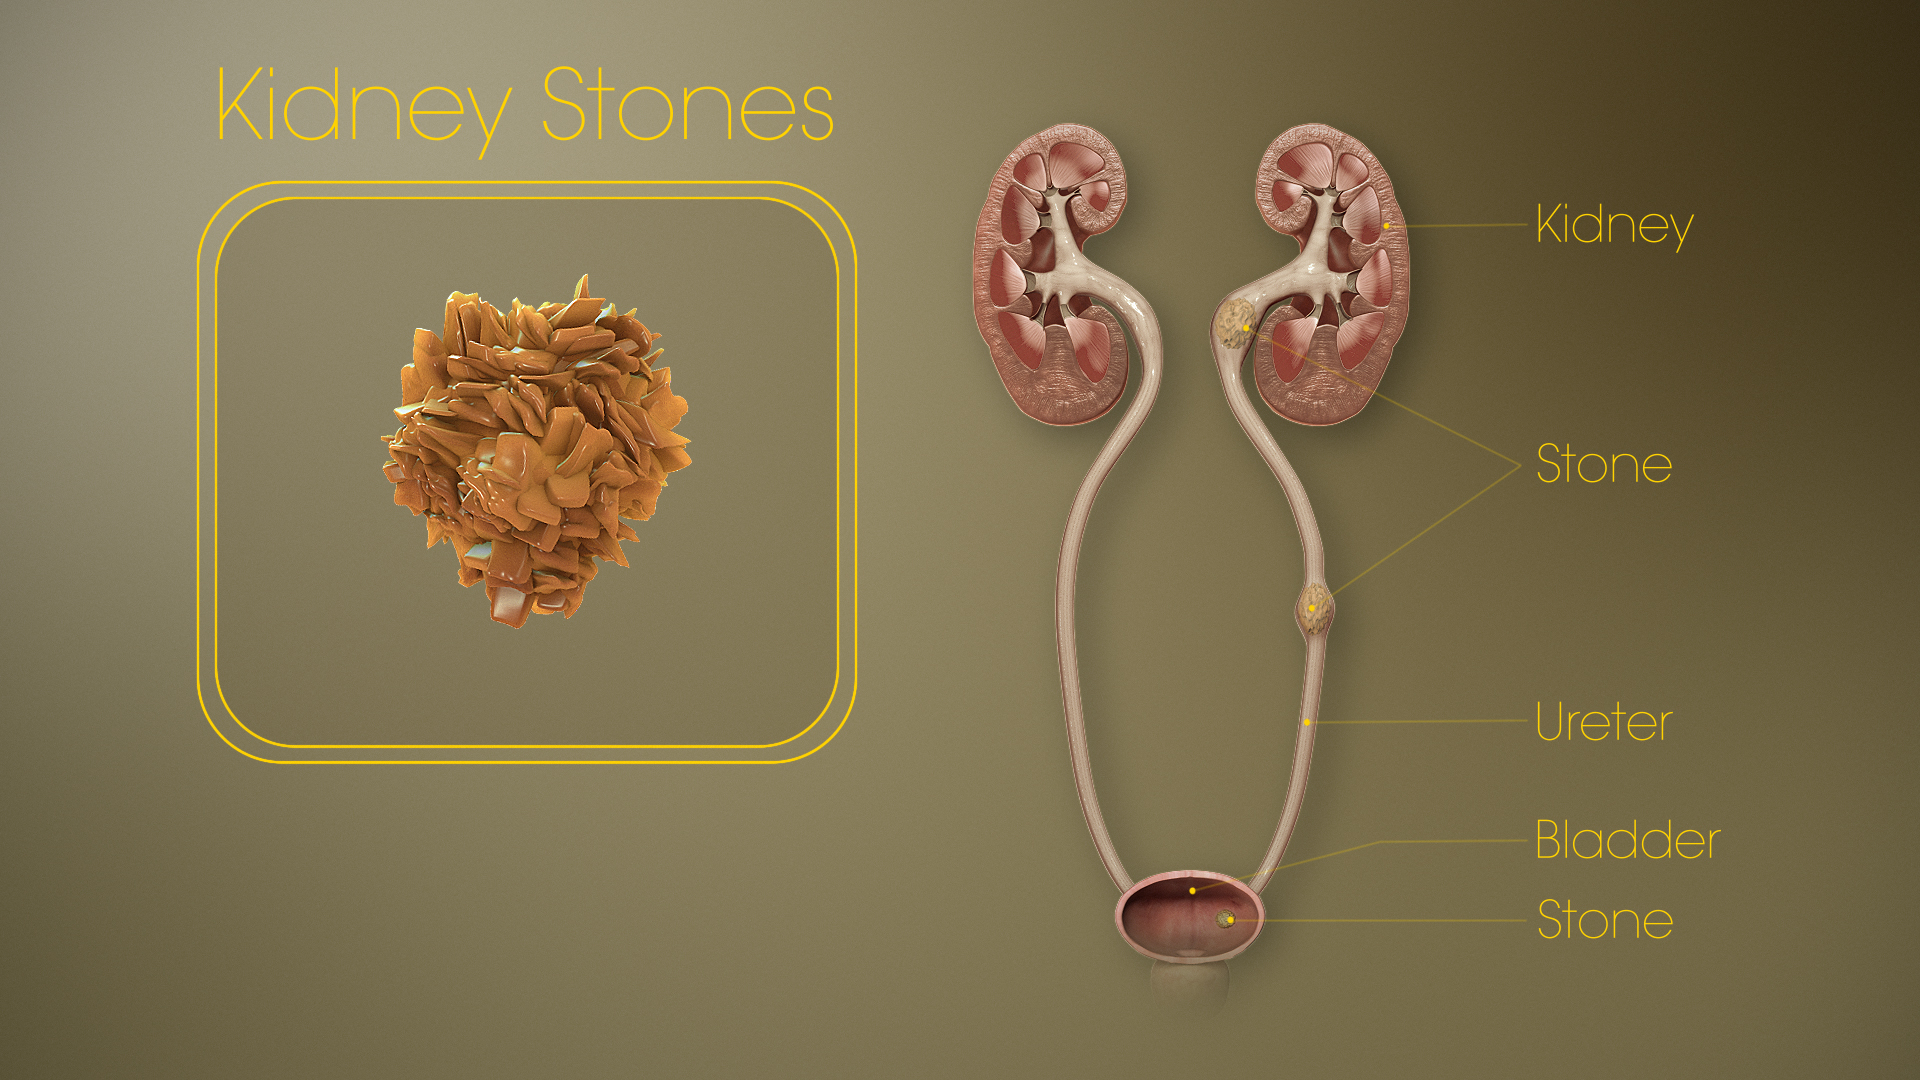 Kidney stones: Causes, Symptoms, Treatment and Medication